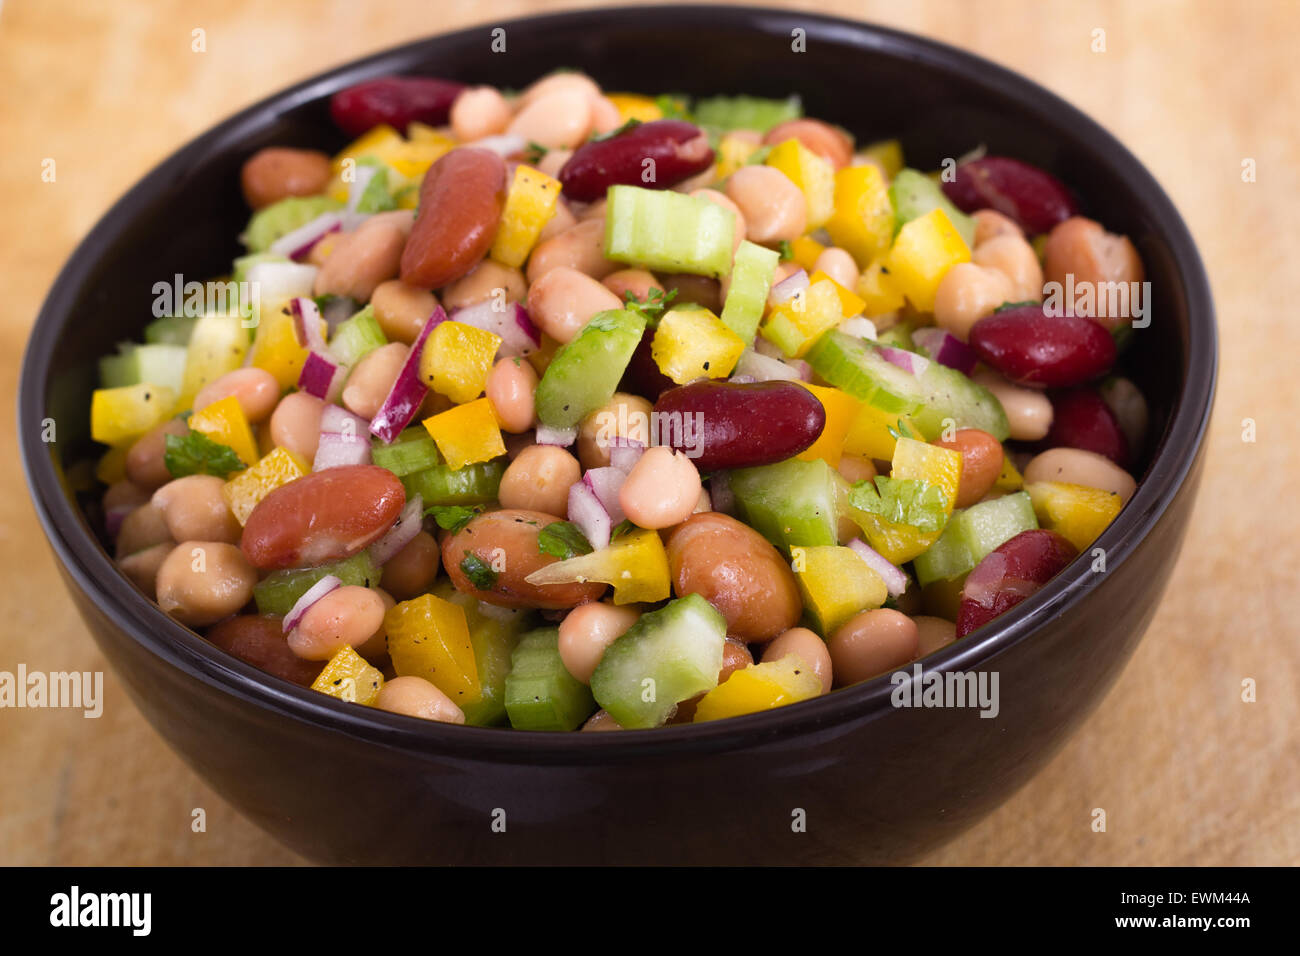 healthy mixed beans and vegetables salad bowl Stock Photo